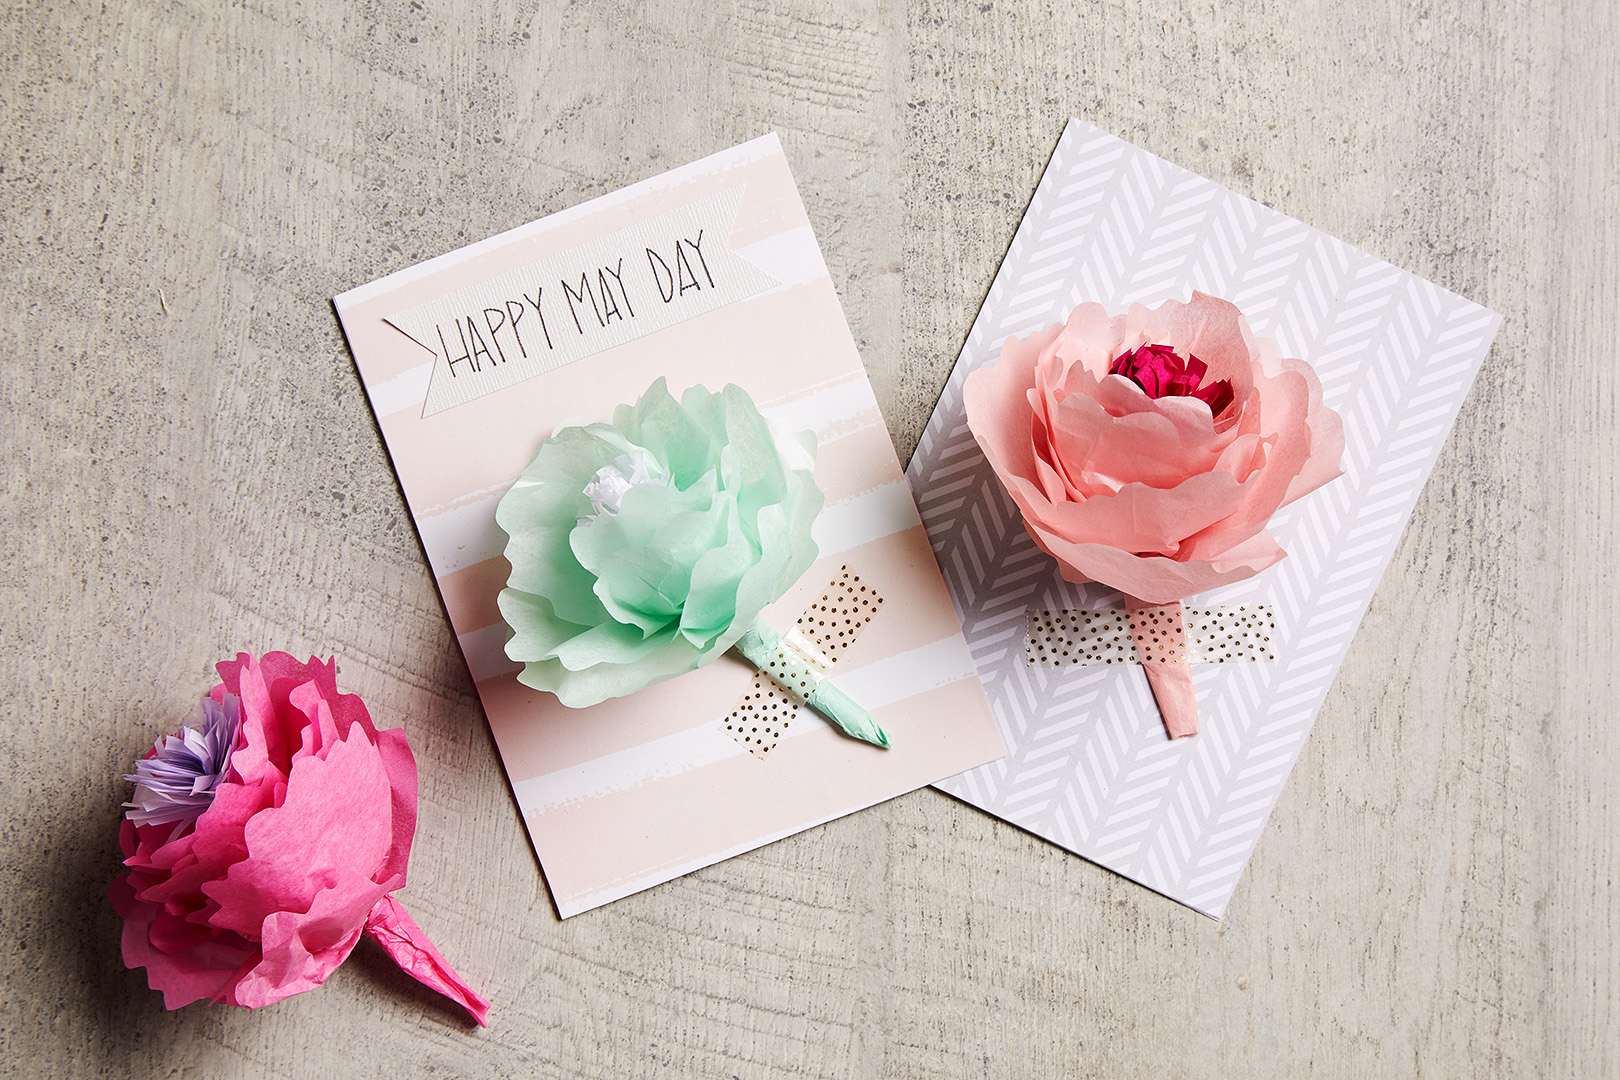 Homemade Mom Birthday Card Ideas The Prettiest Cards To Make Or Print For Mothers Day